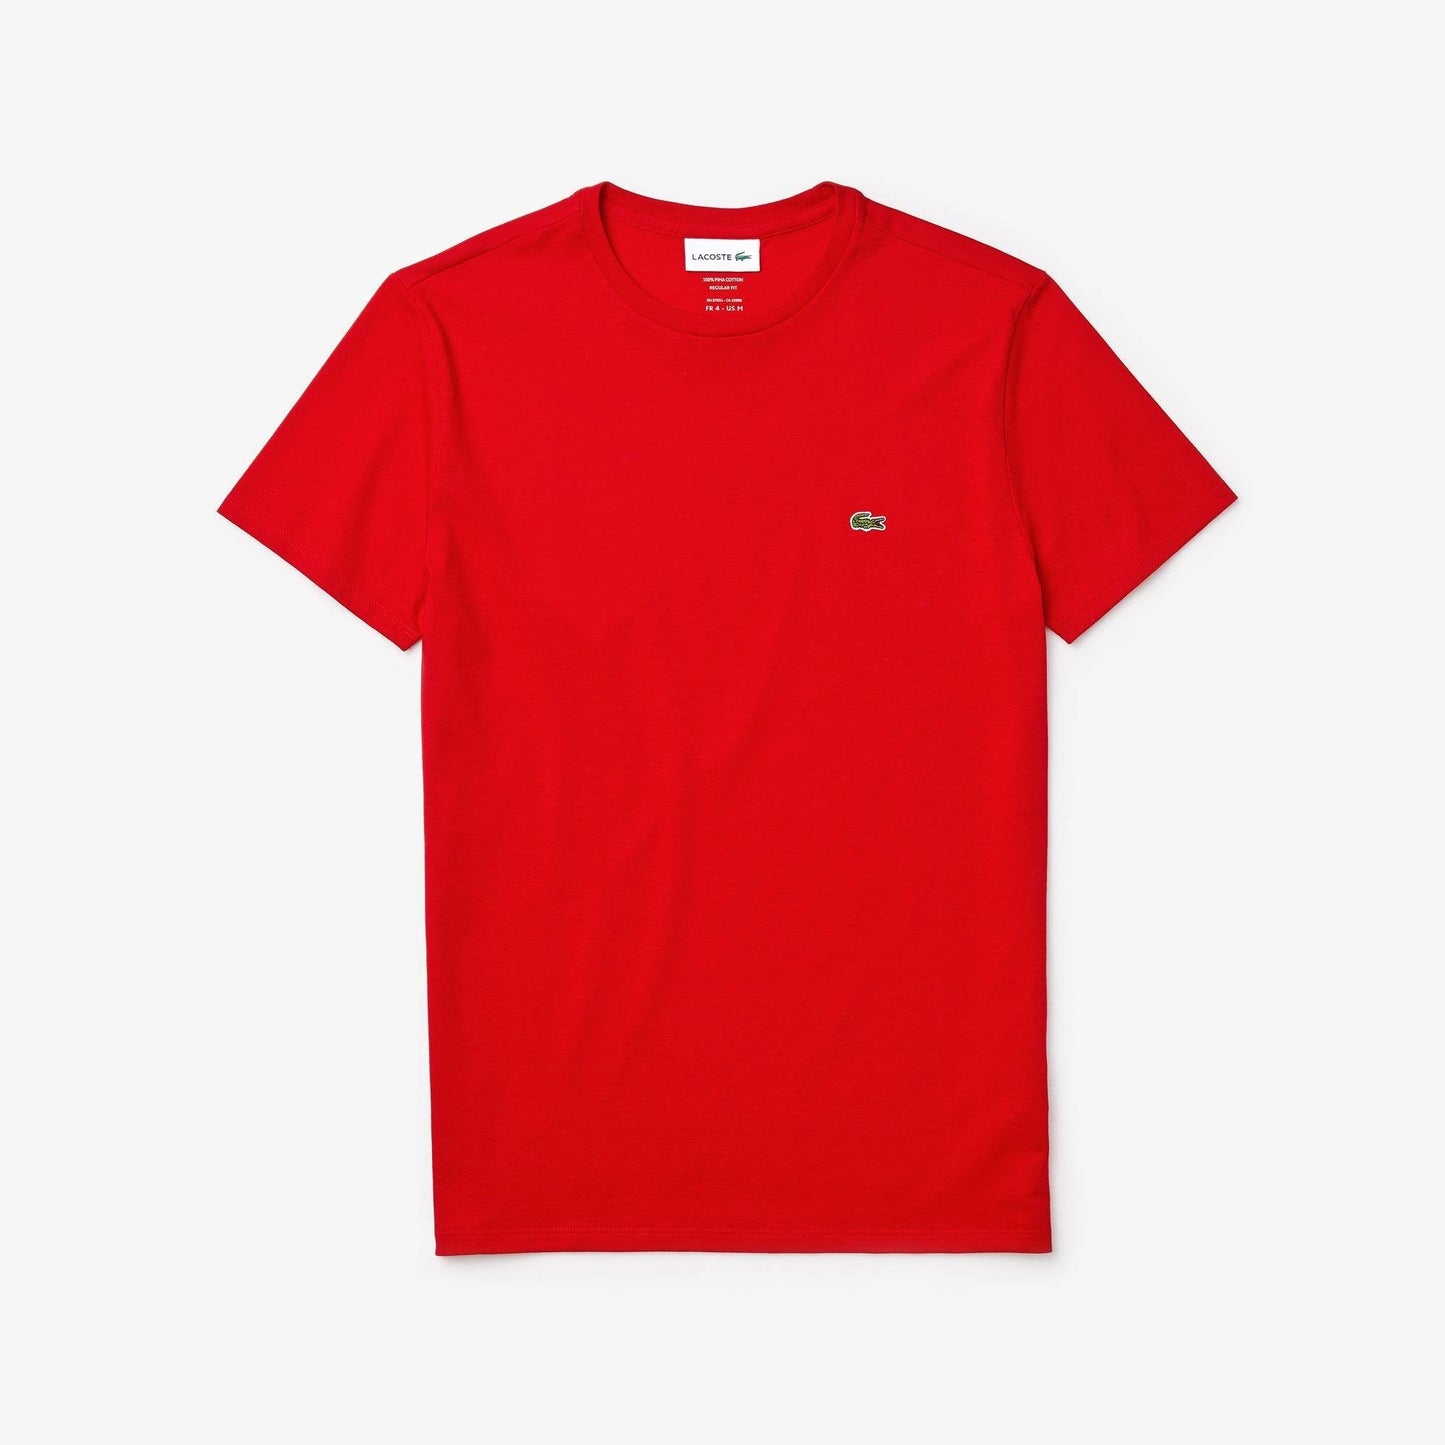 Lacoste - Pima Cotton Jersey T-Shirt, Crew Neck - Red